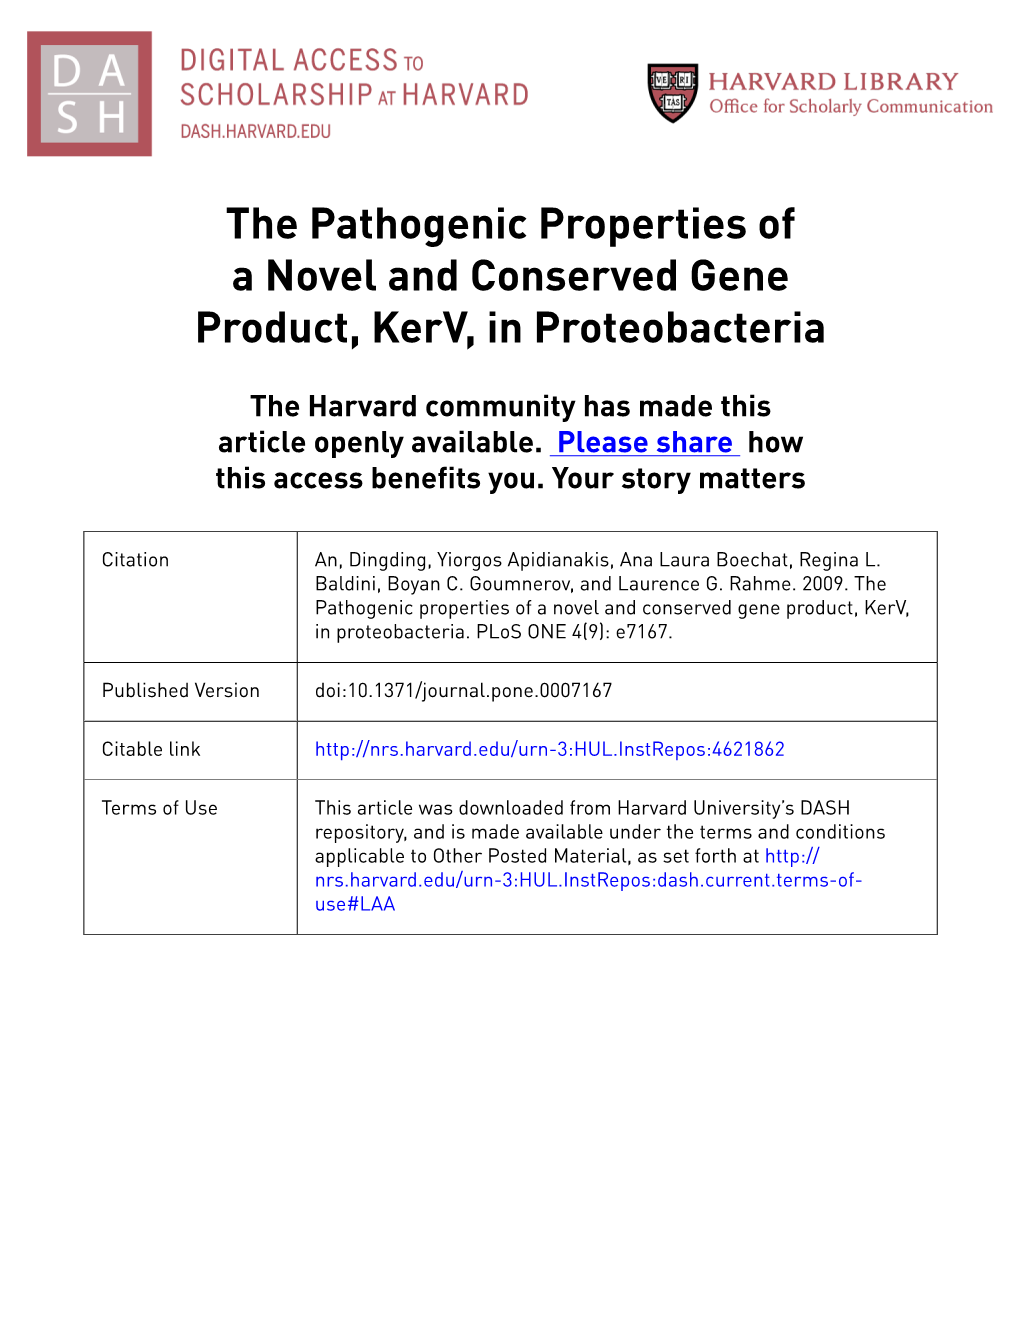 The Pathogenic Properties of a Novel and Conserved Gene Product, Kerv, in Proteobacteria